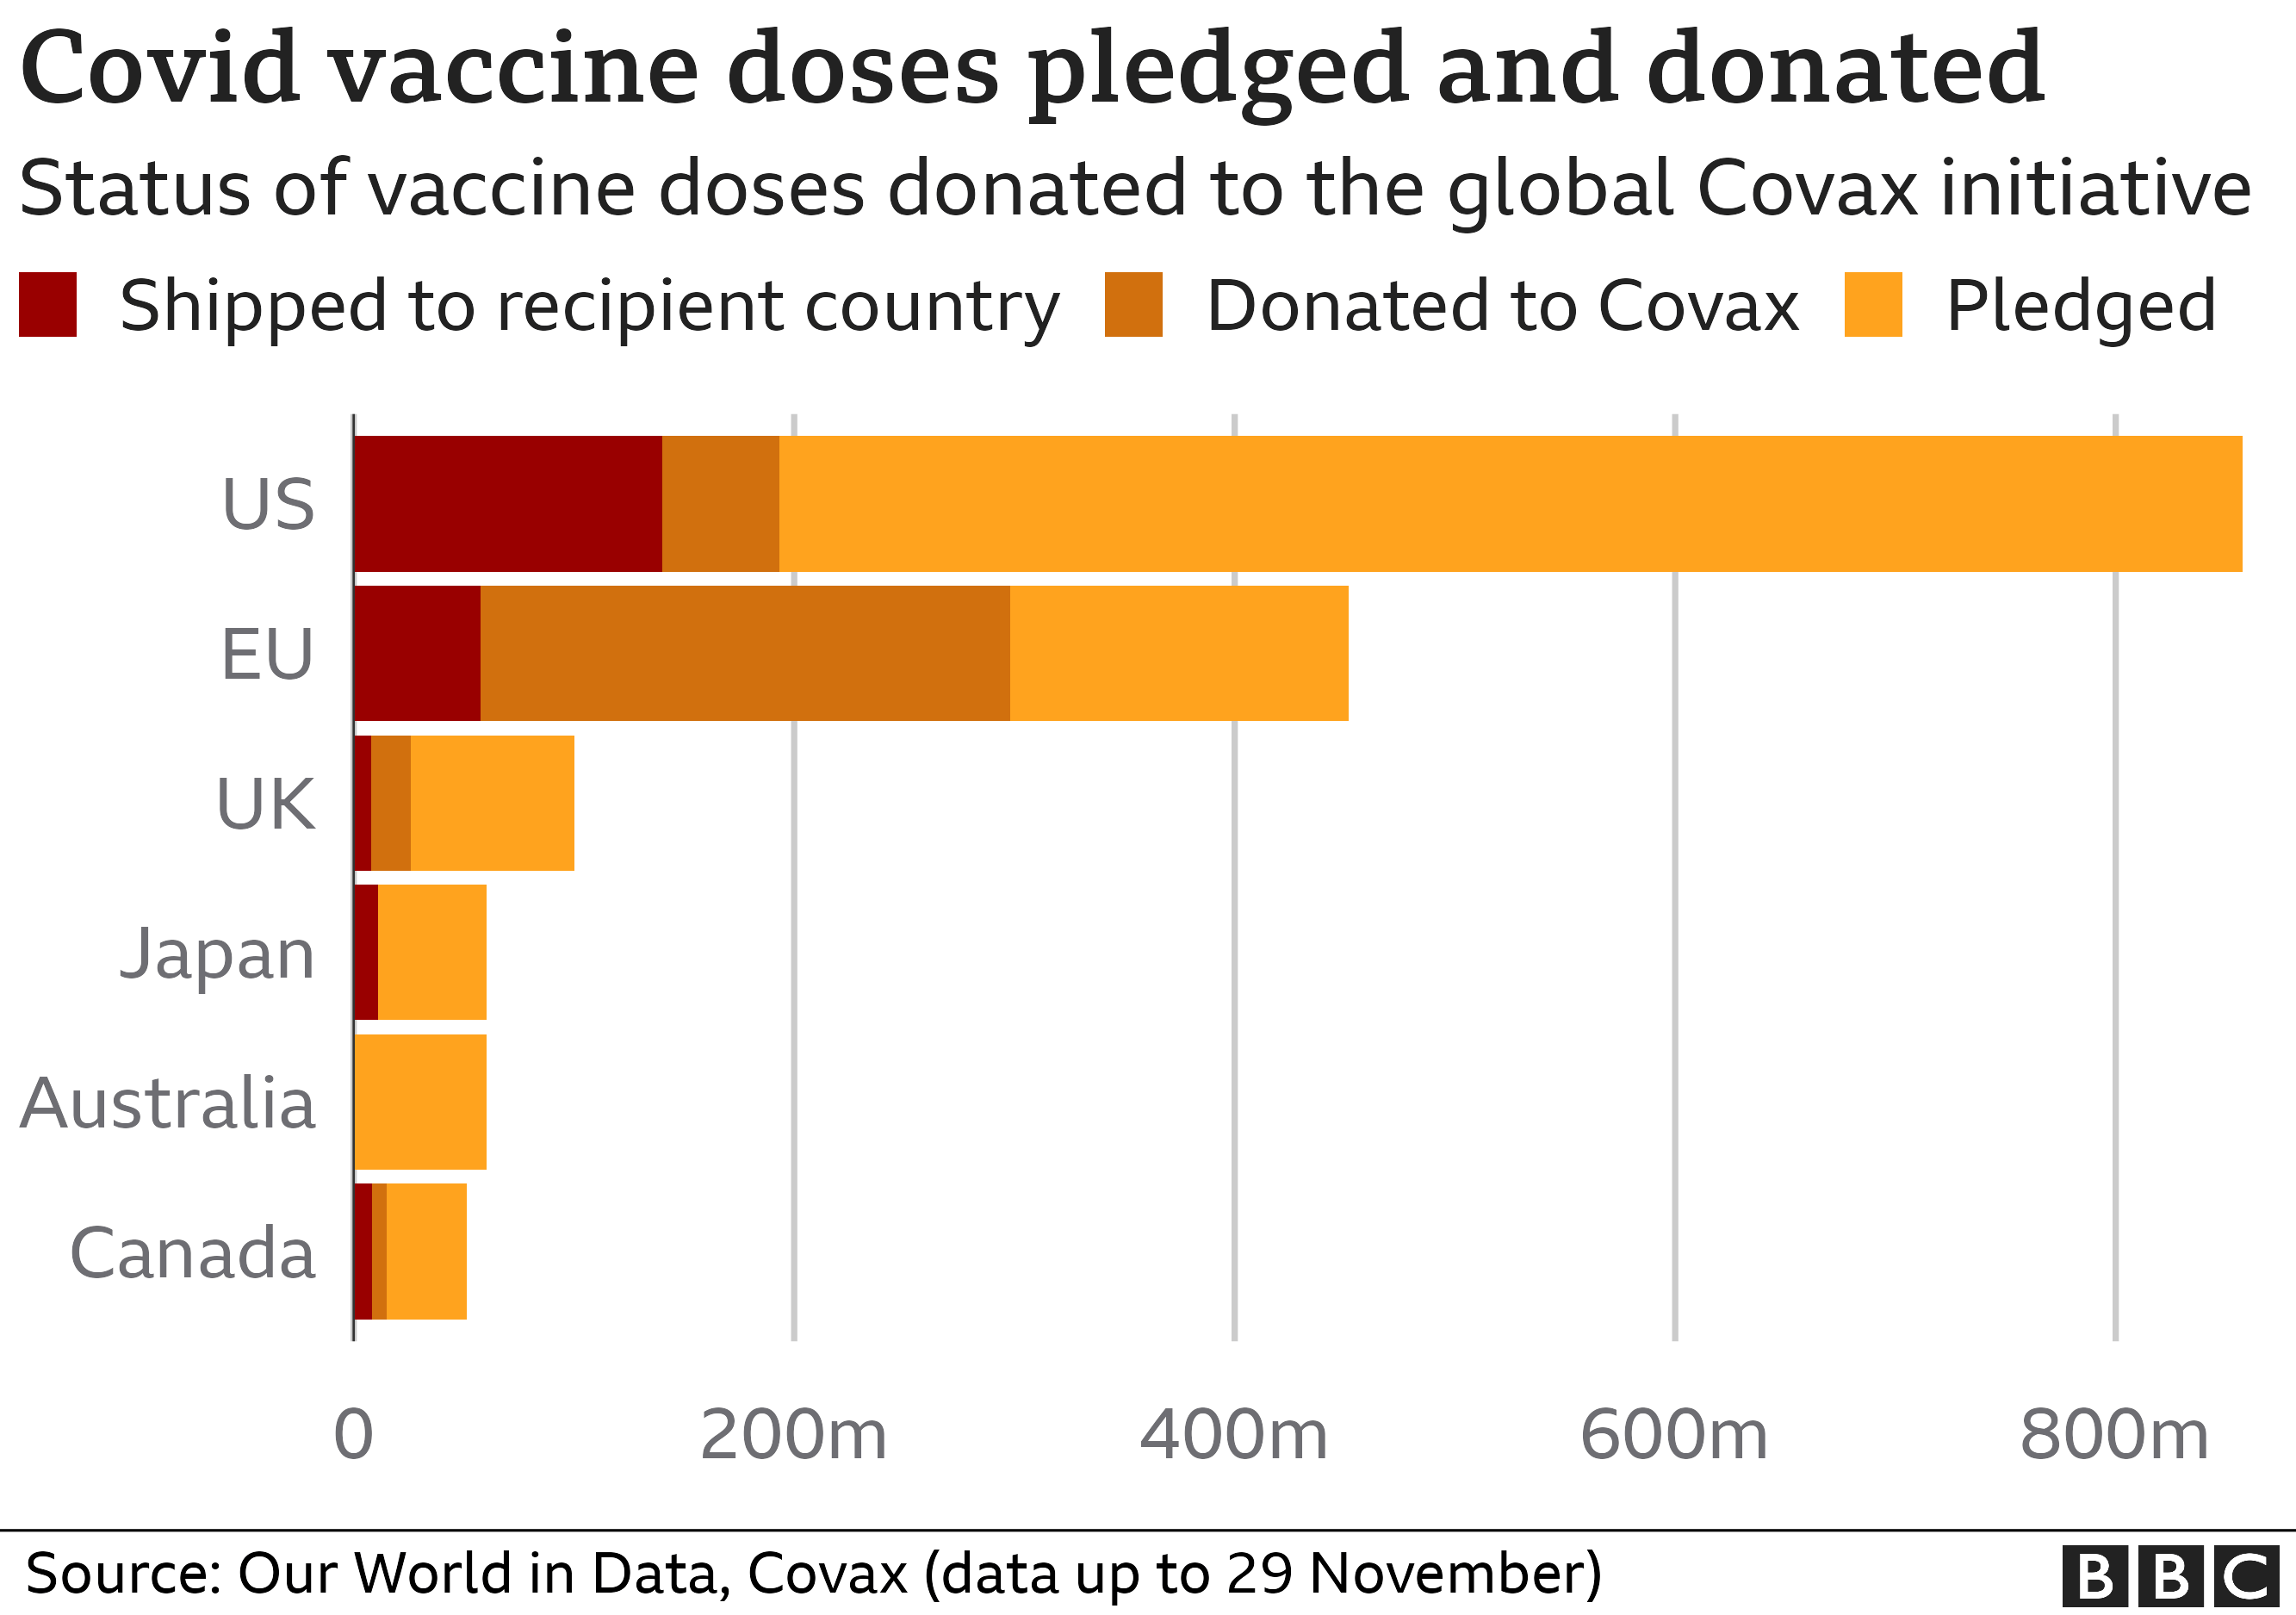 Chart showing Covid vaccine doses pledged and donated